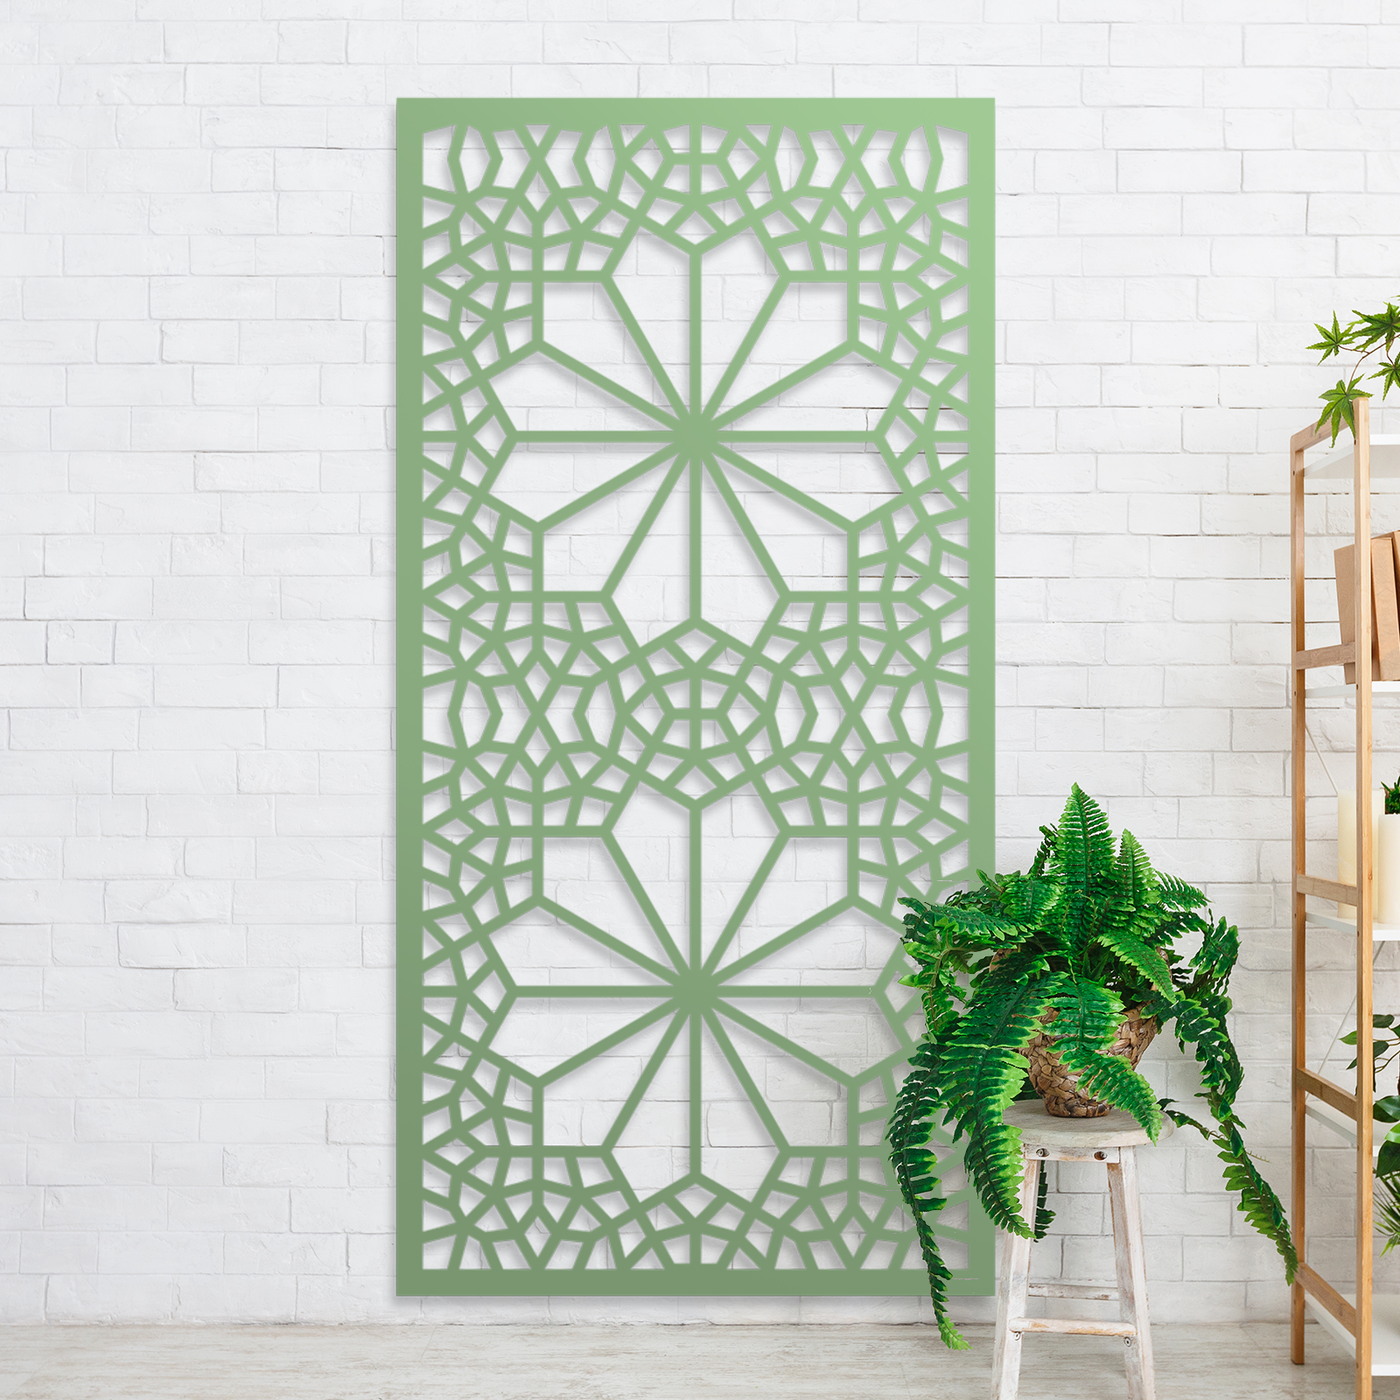 Ordinata Metal Garden Screen: A Great Way to Add Style and Privacy to Your Outdoor Space